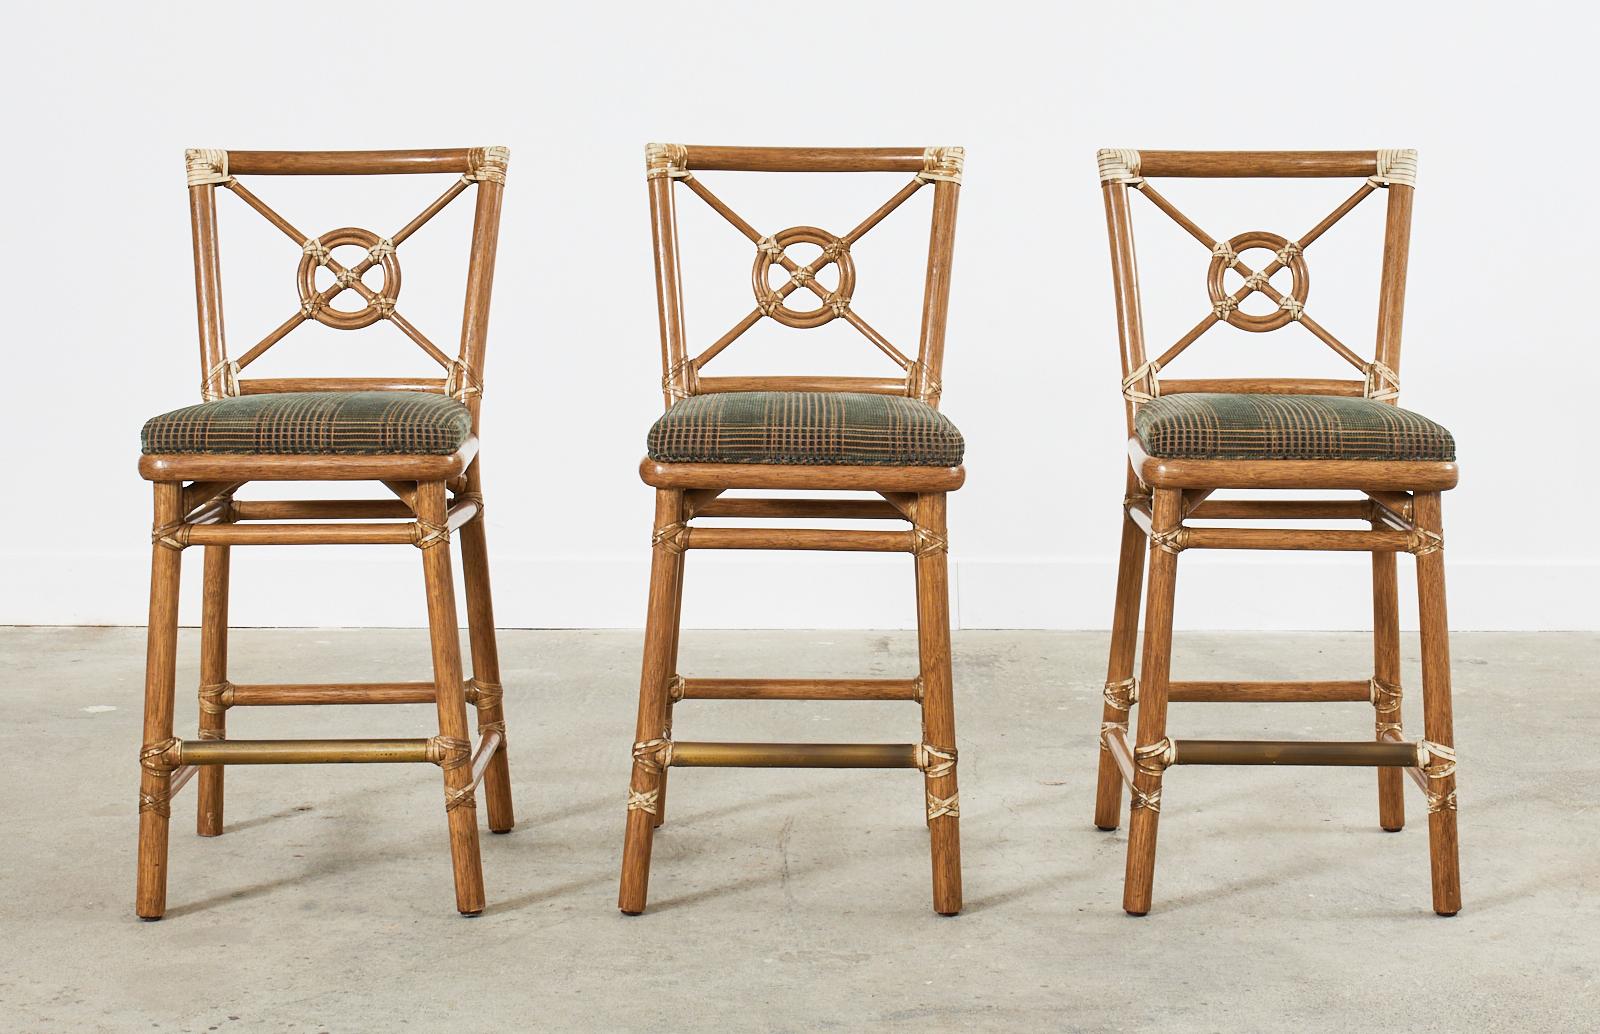 Iconic set of three McGuire rattan counter height barstools featuring the target design motif designed by Elinor McGuire. The thick rattan frames are lashed together with leather rawhide laces. The stools have a footrest in the front with an